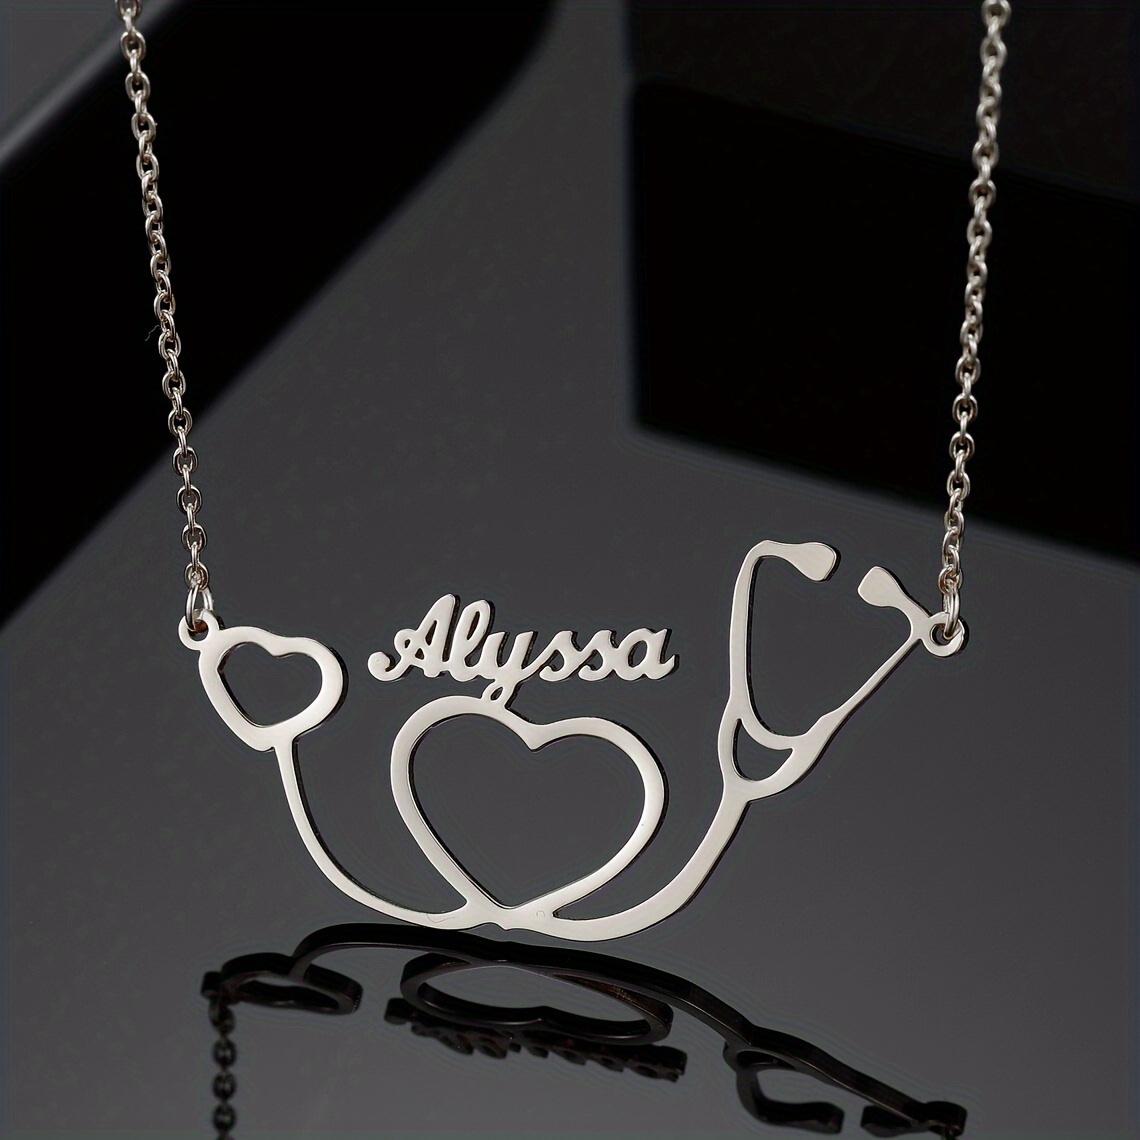 

Customized Name Stethoscope Necklace, Heart Name Necklace, Personalized Name Necklace, Nurse Gift, Medical Student Gift, Graduation Gift For Her (english Only)